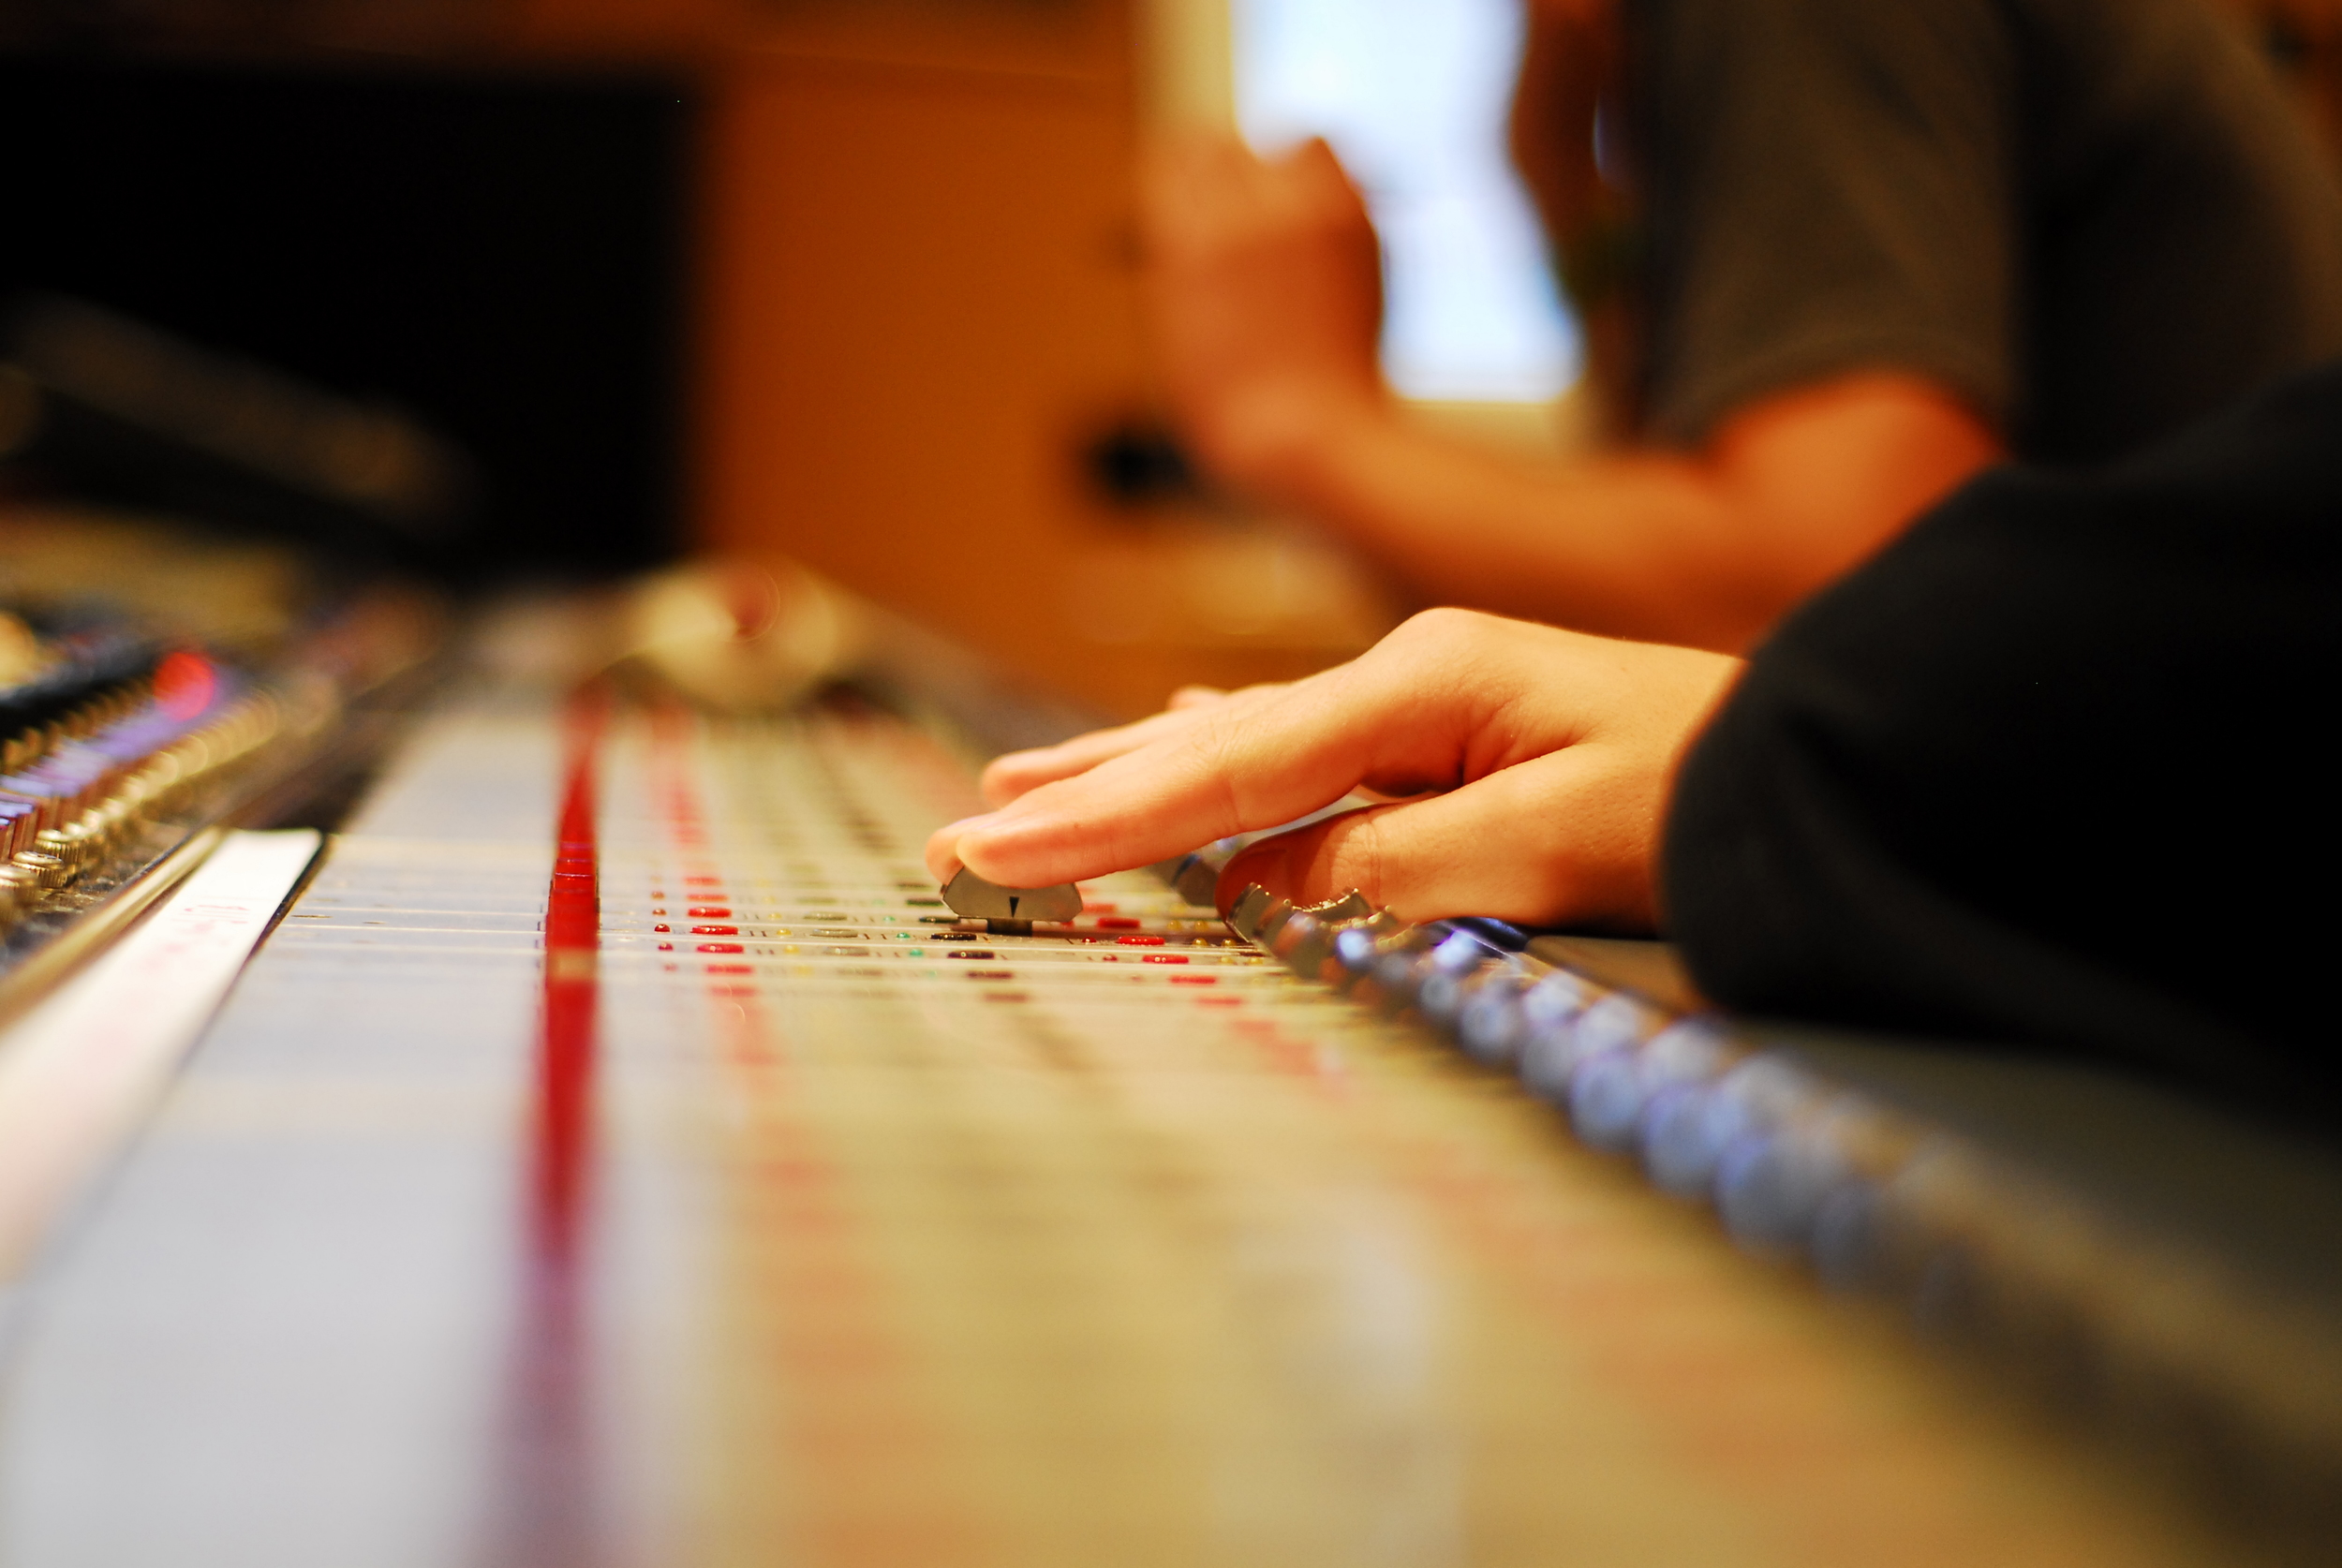 Audio Engineering & Music Production Career Track Campers collaborate during a mixing session